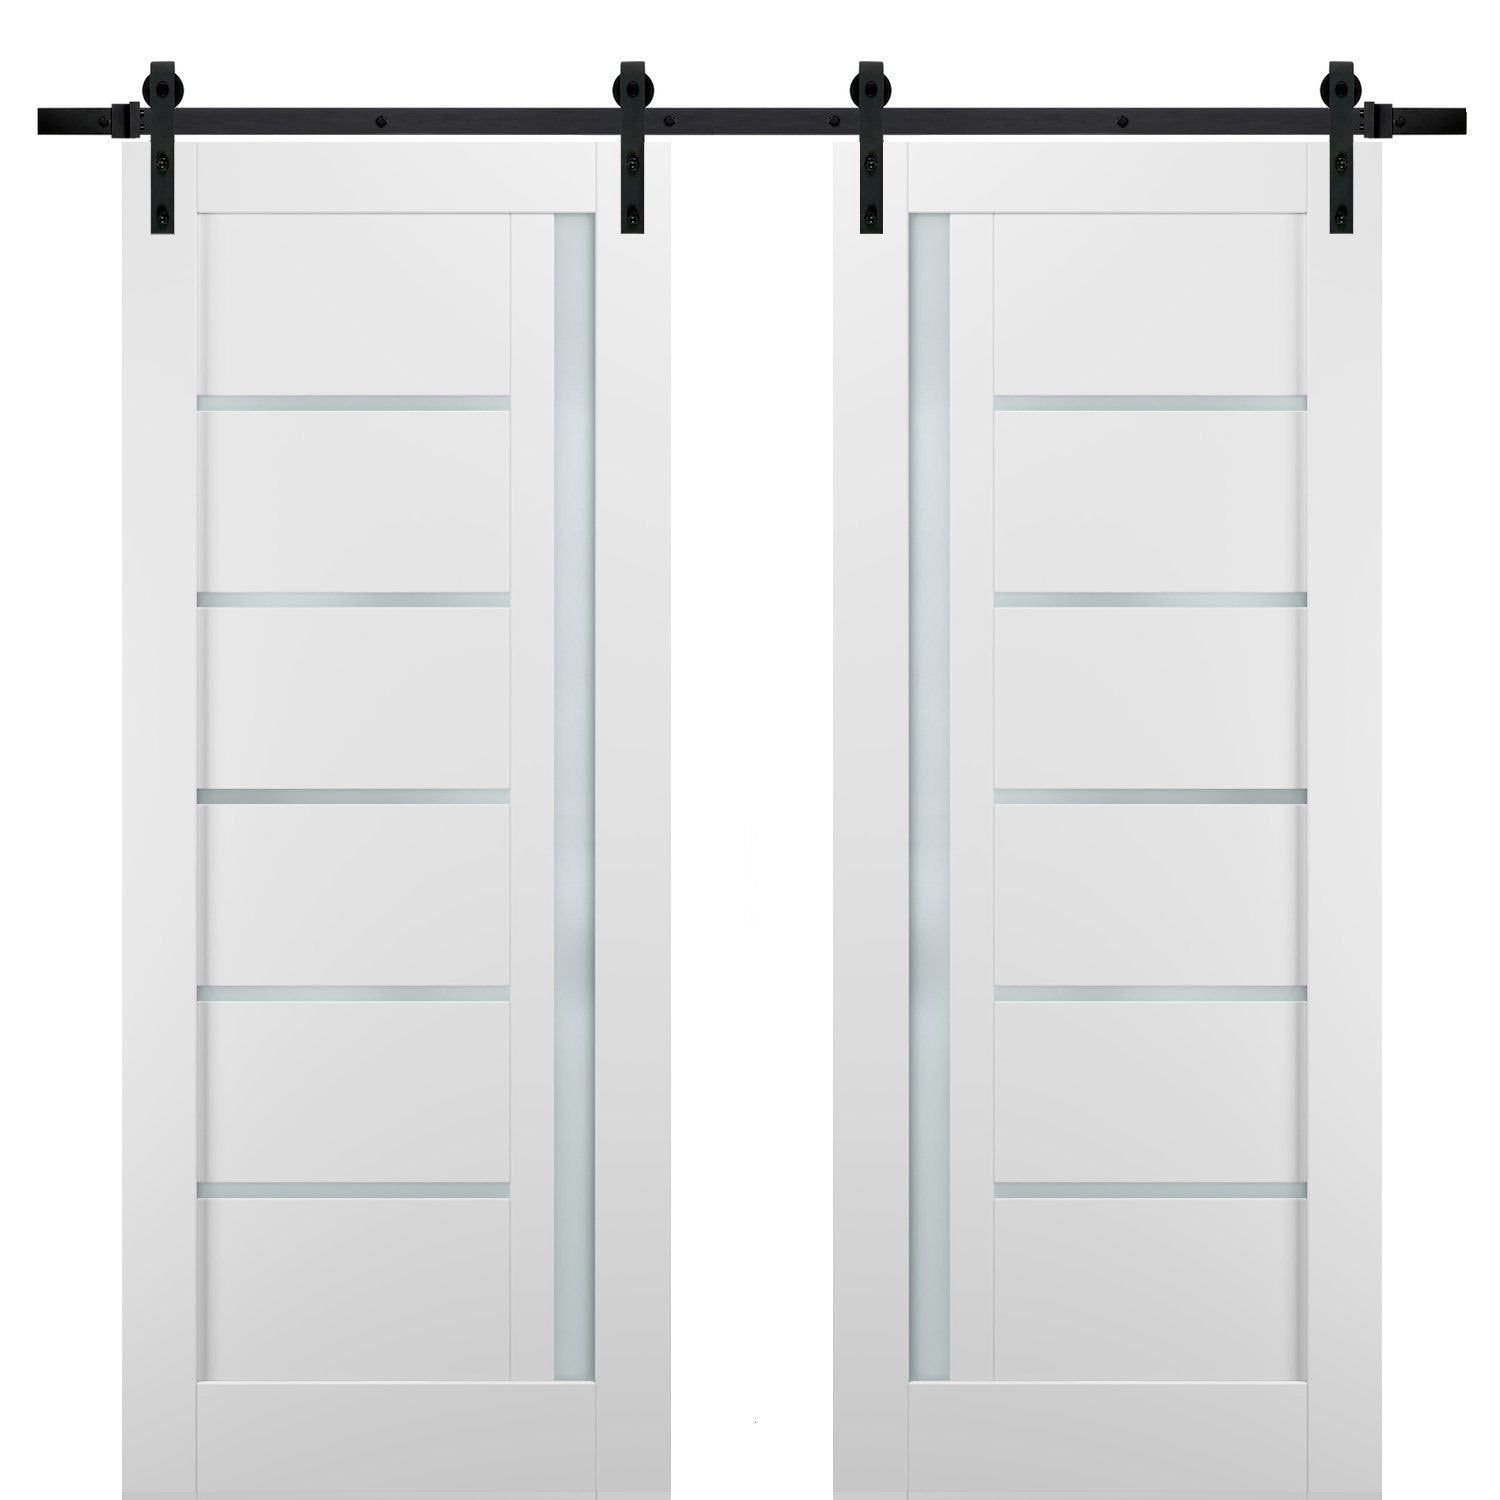 Quadro 4088 White Silk Double Barn Door with Frosted Glass | Black Rail